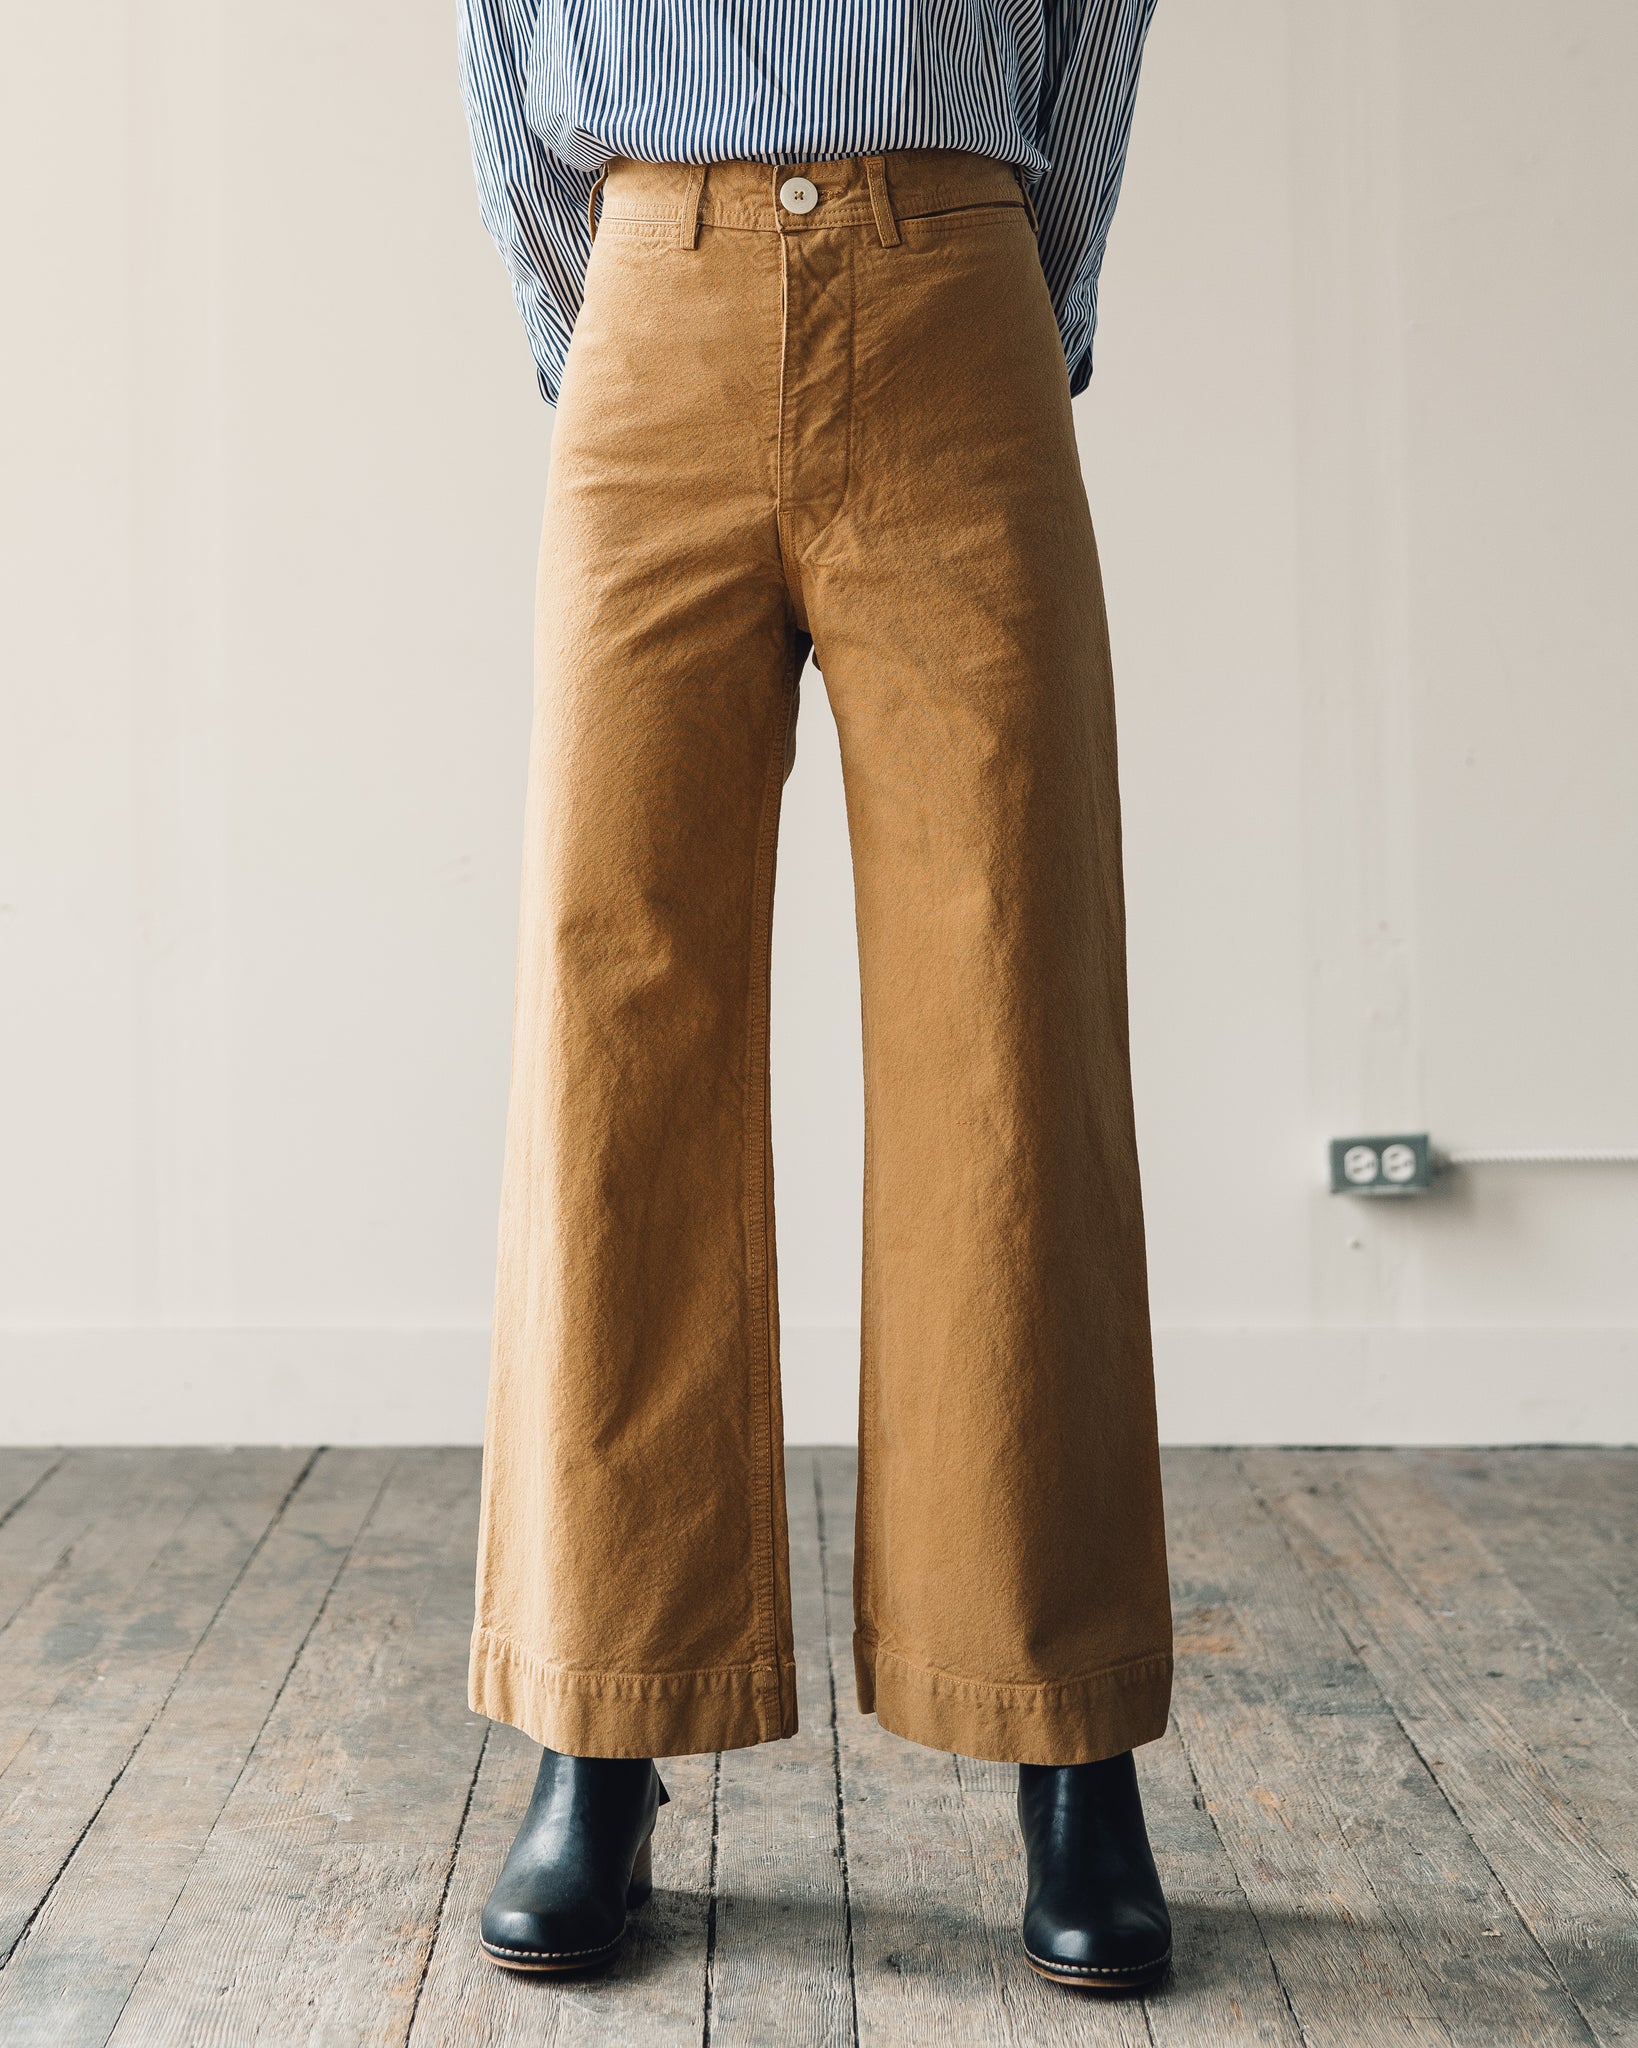 Jesse Kamm Is Accusing Madewell of Copying Her Wide-Leg Pants